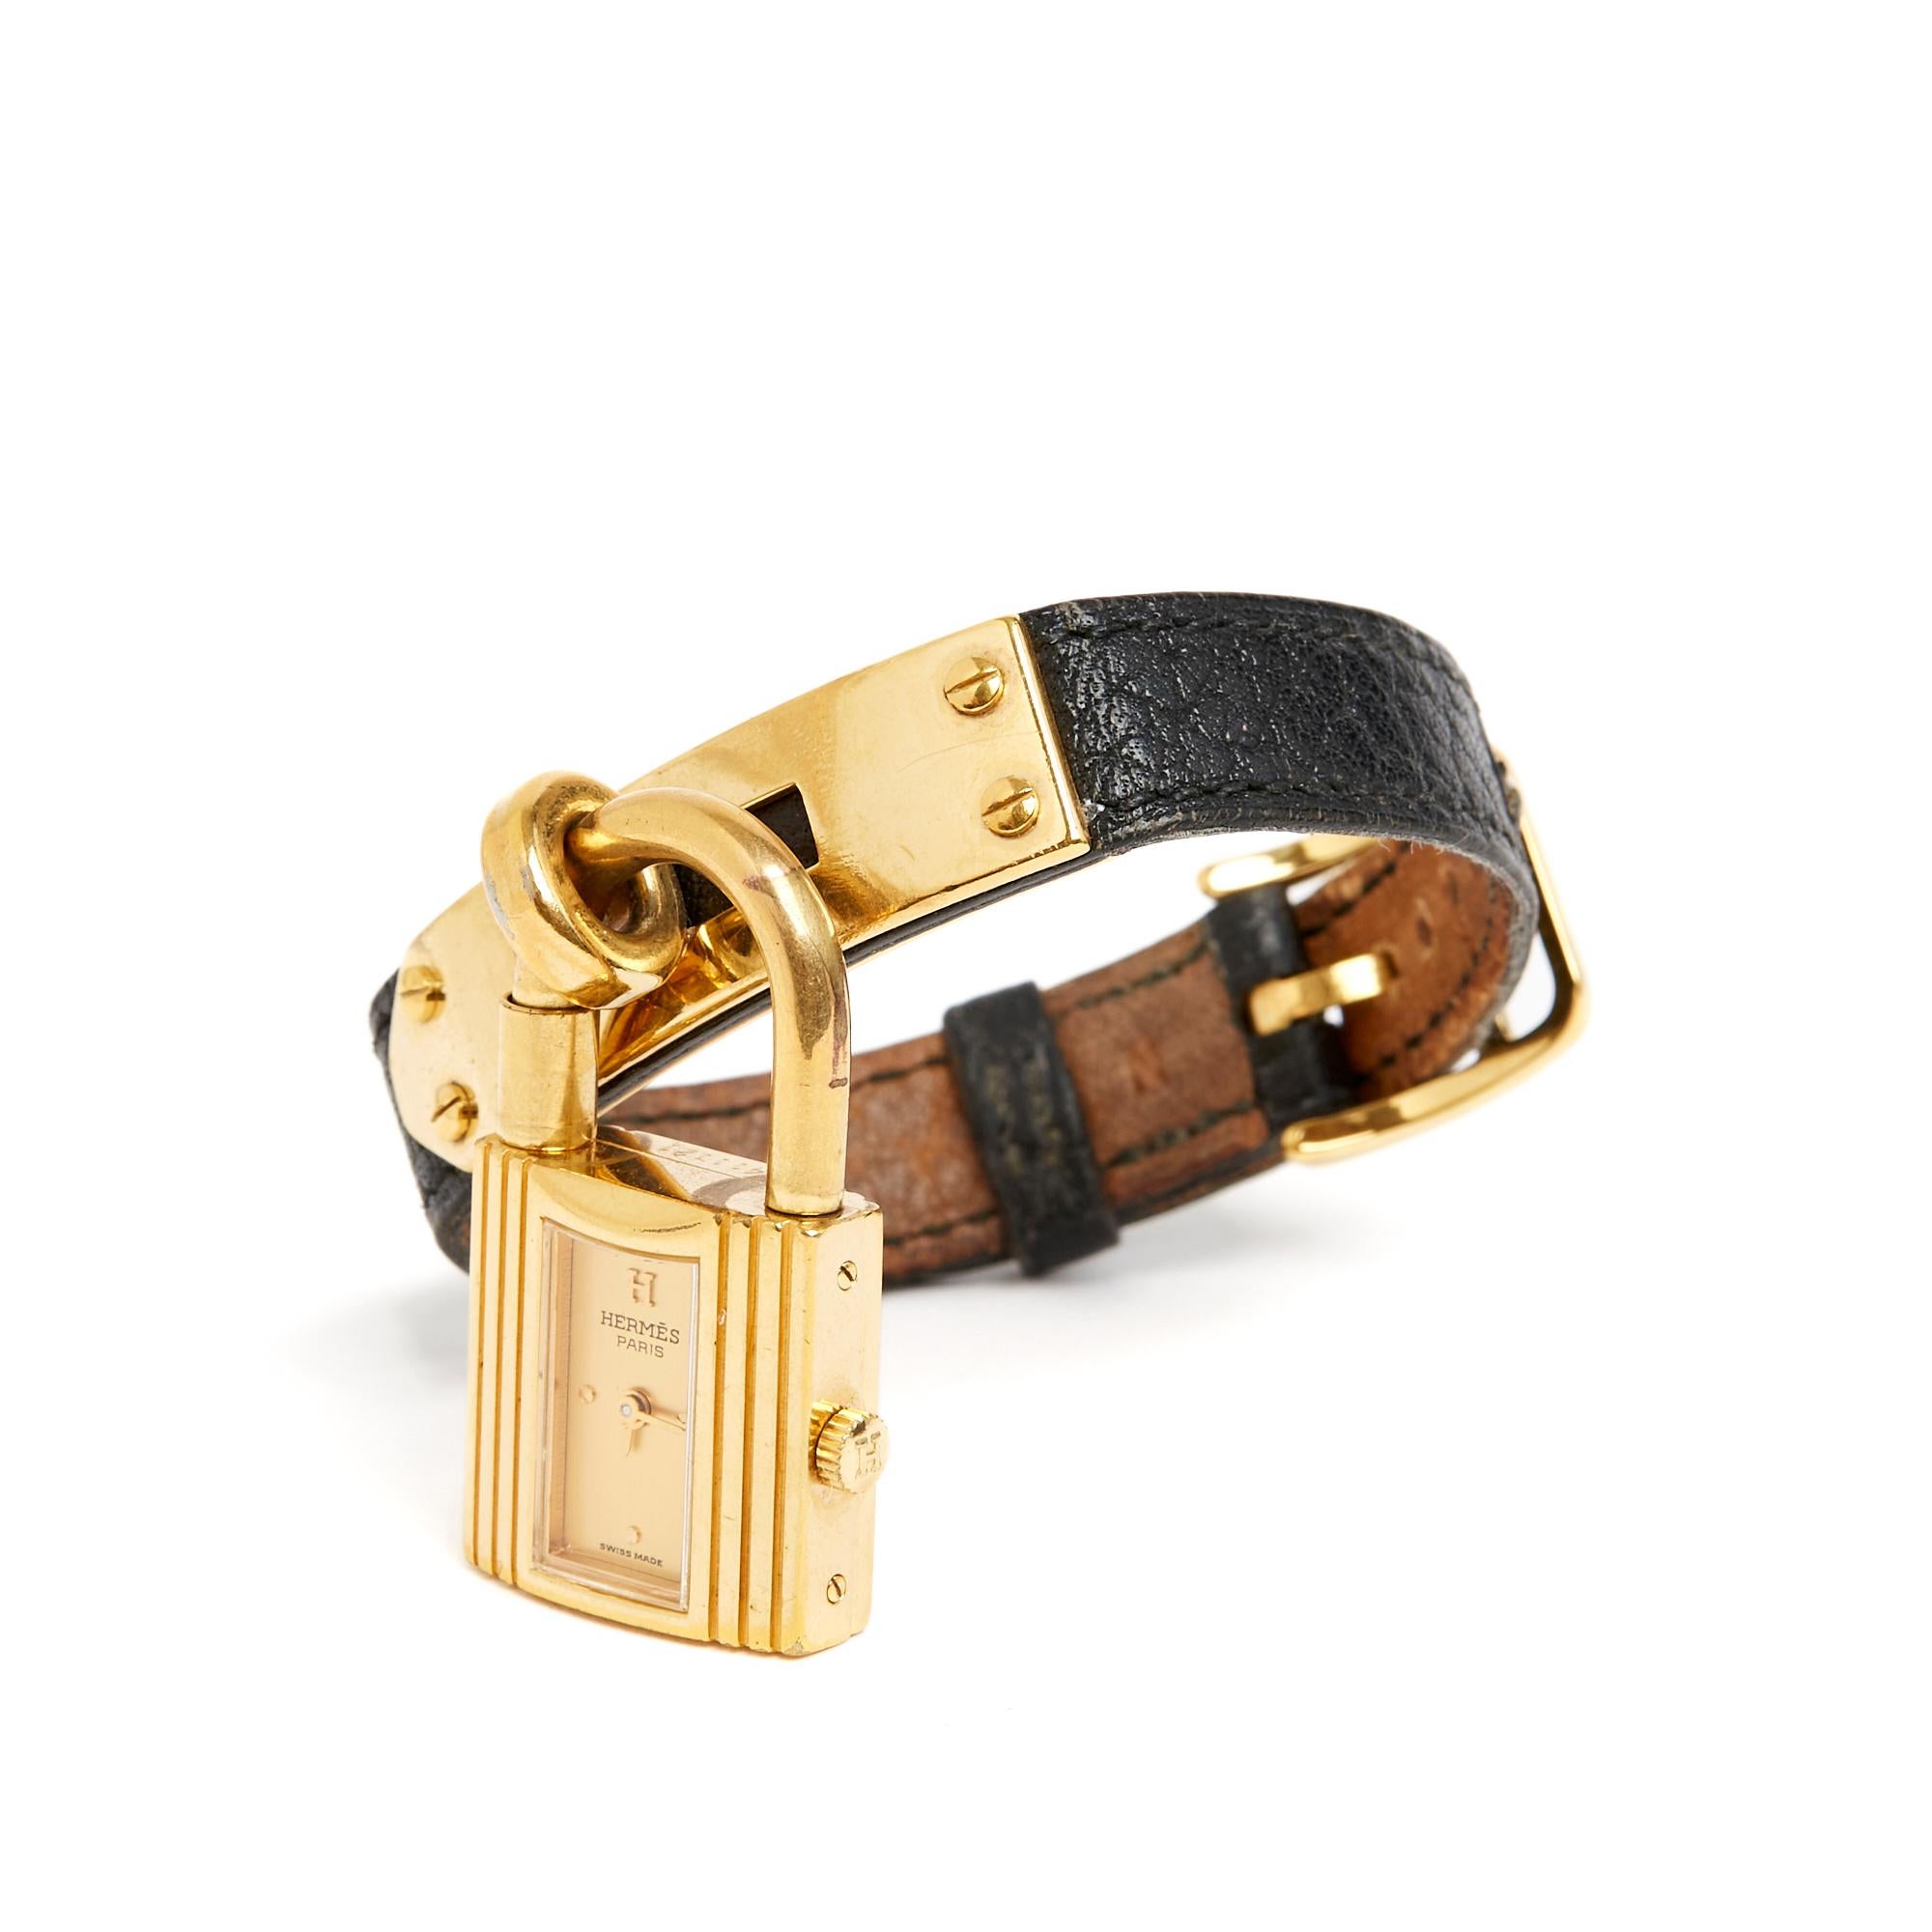 Hermès model Kelly watch in gold-plated metal, satin-finish gold background, indexes at 12 o'clock, 3 o'clock, 6 o'clock and 9 o'clock in gilded stud in the Dog Collar style, quartz movement (battery), black grained leather strap, gold-plated metal